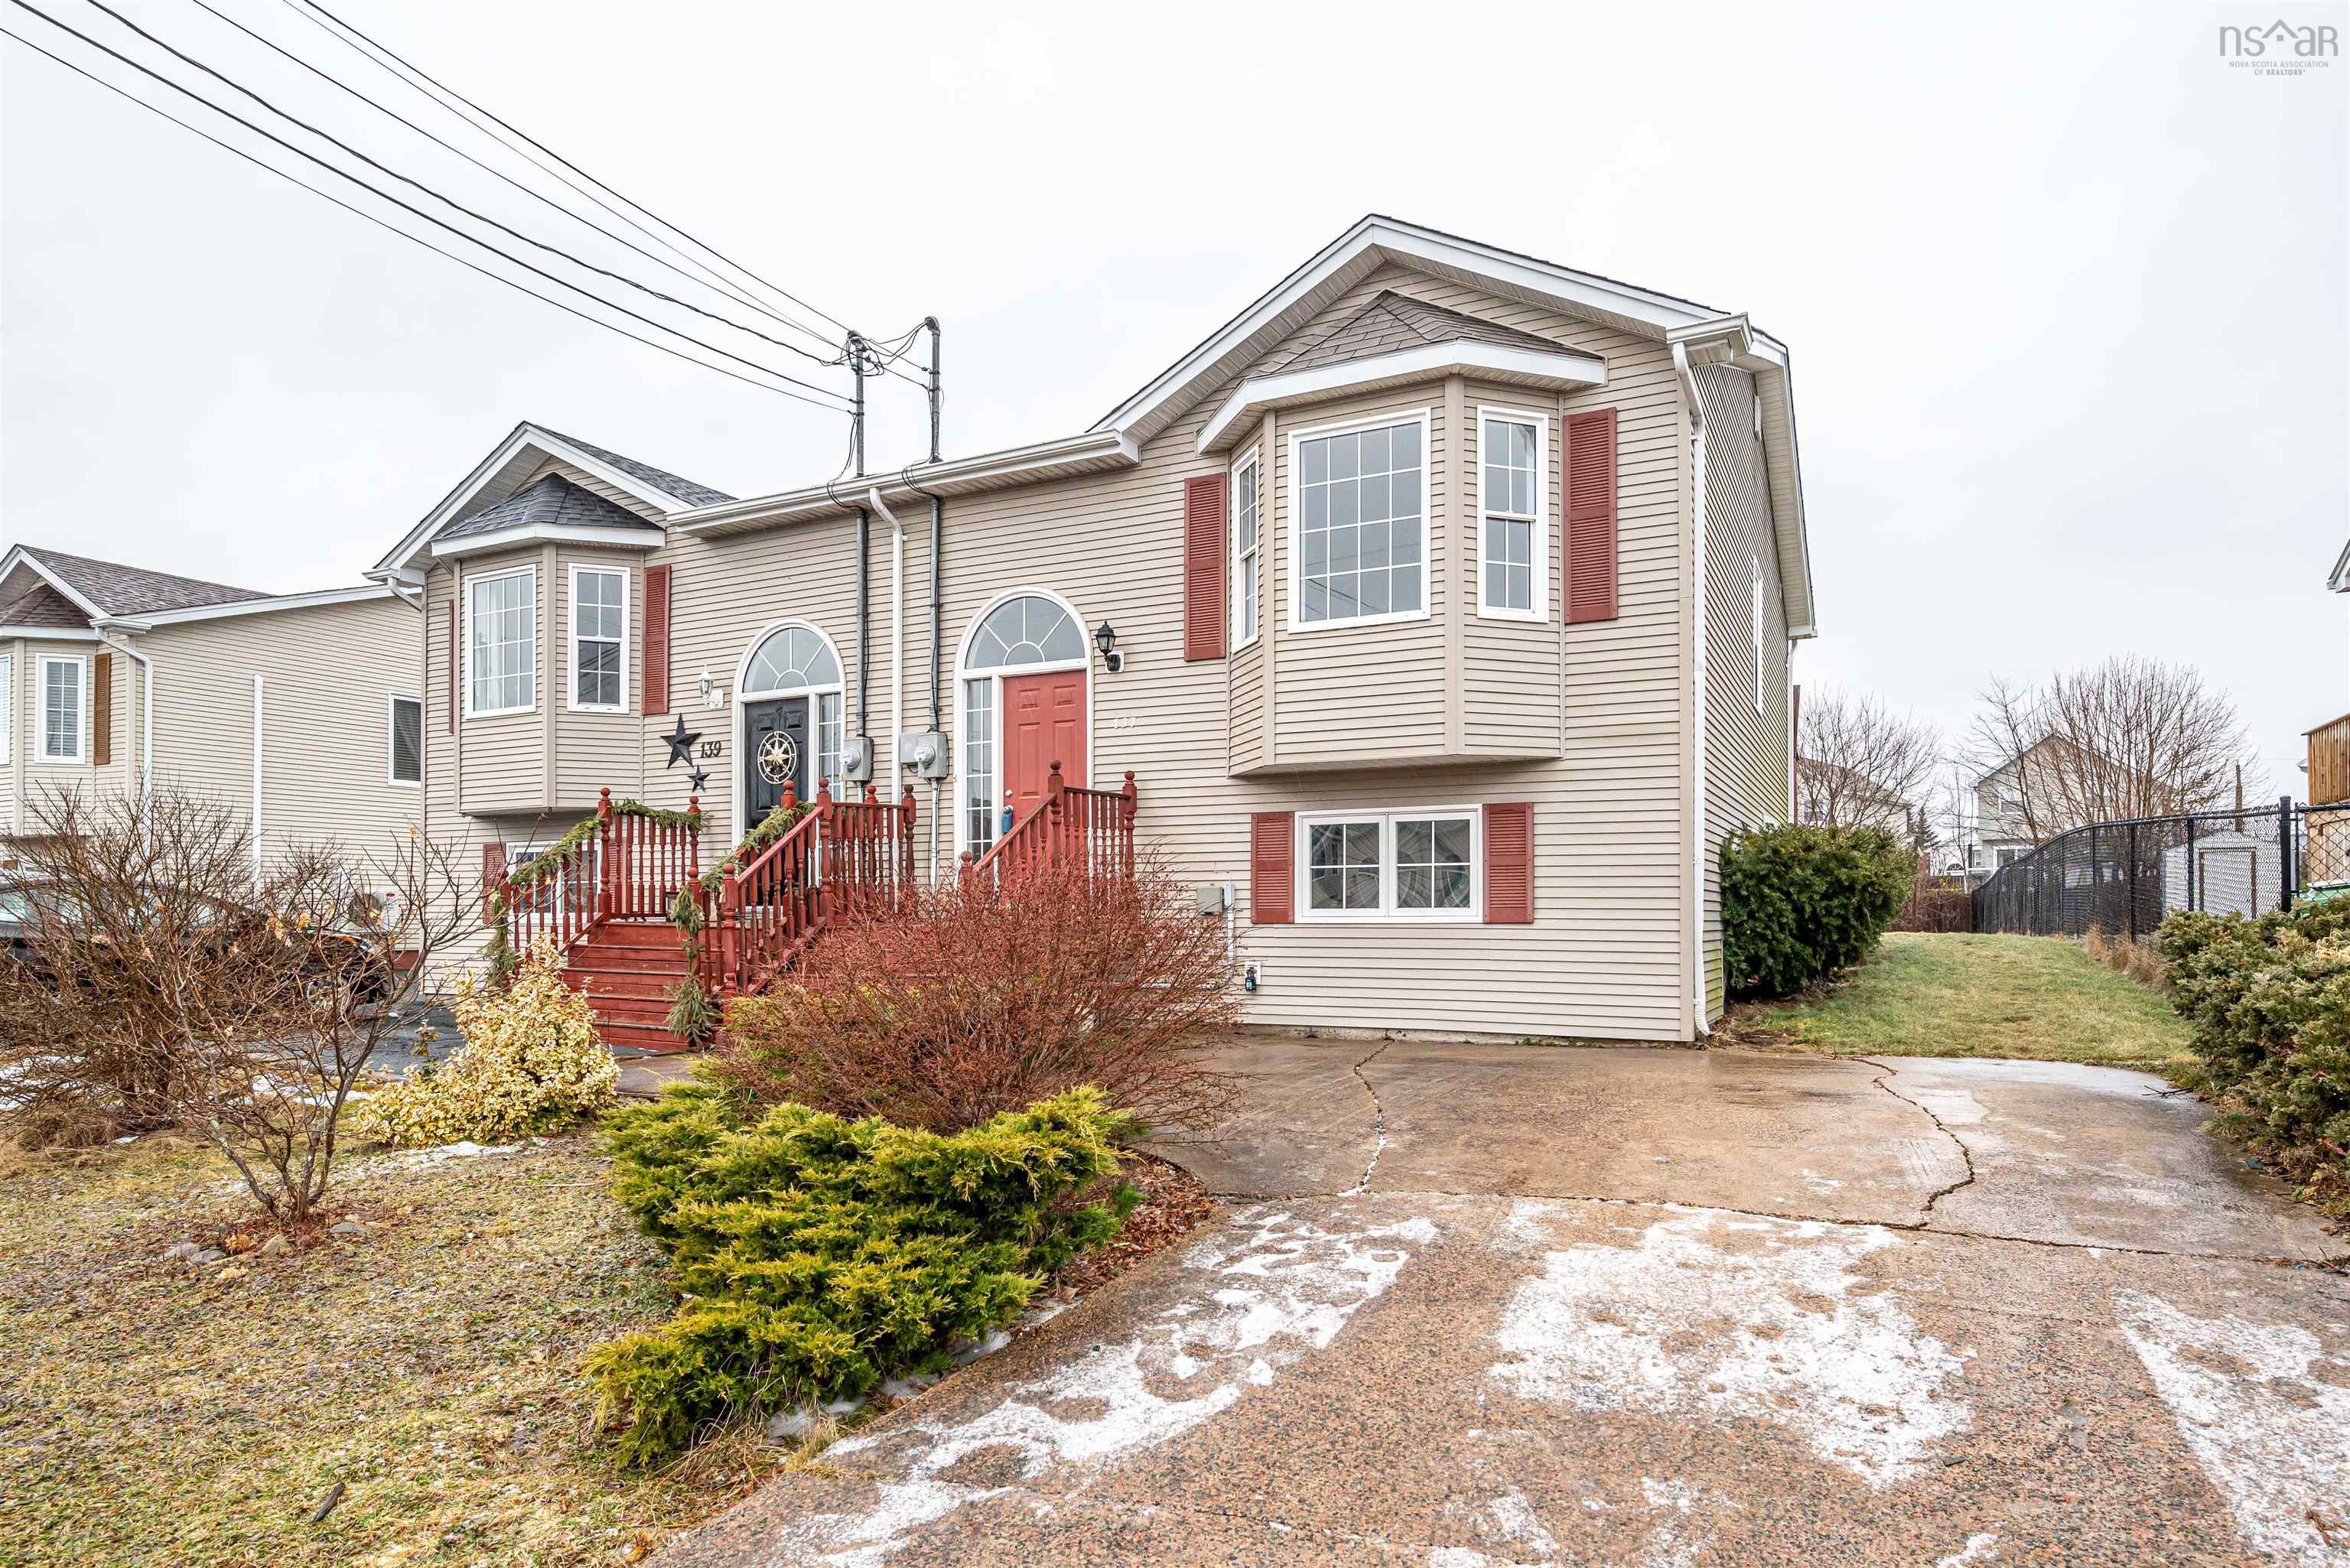 137 VICKY CRES, EASTERN PASSAGE, NS